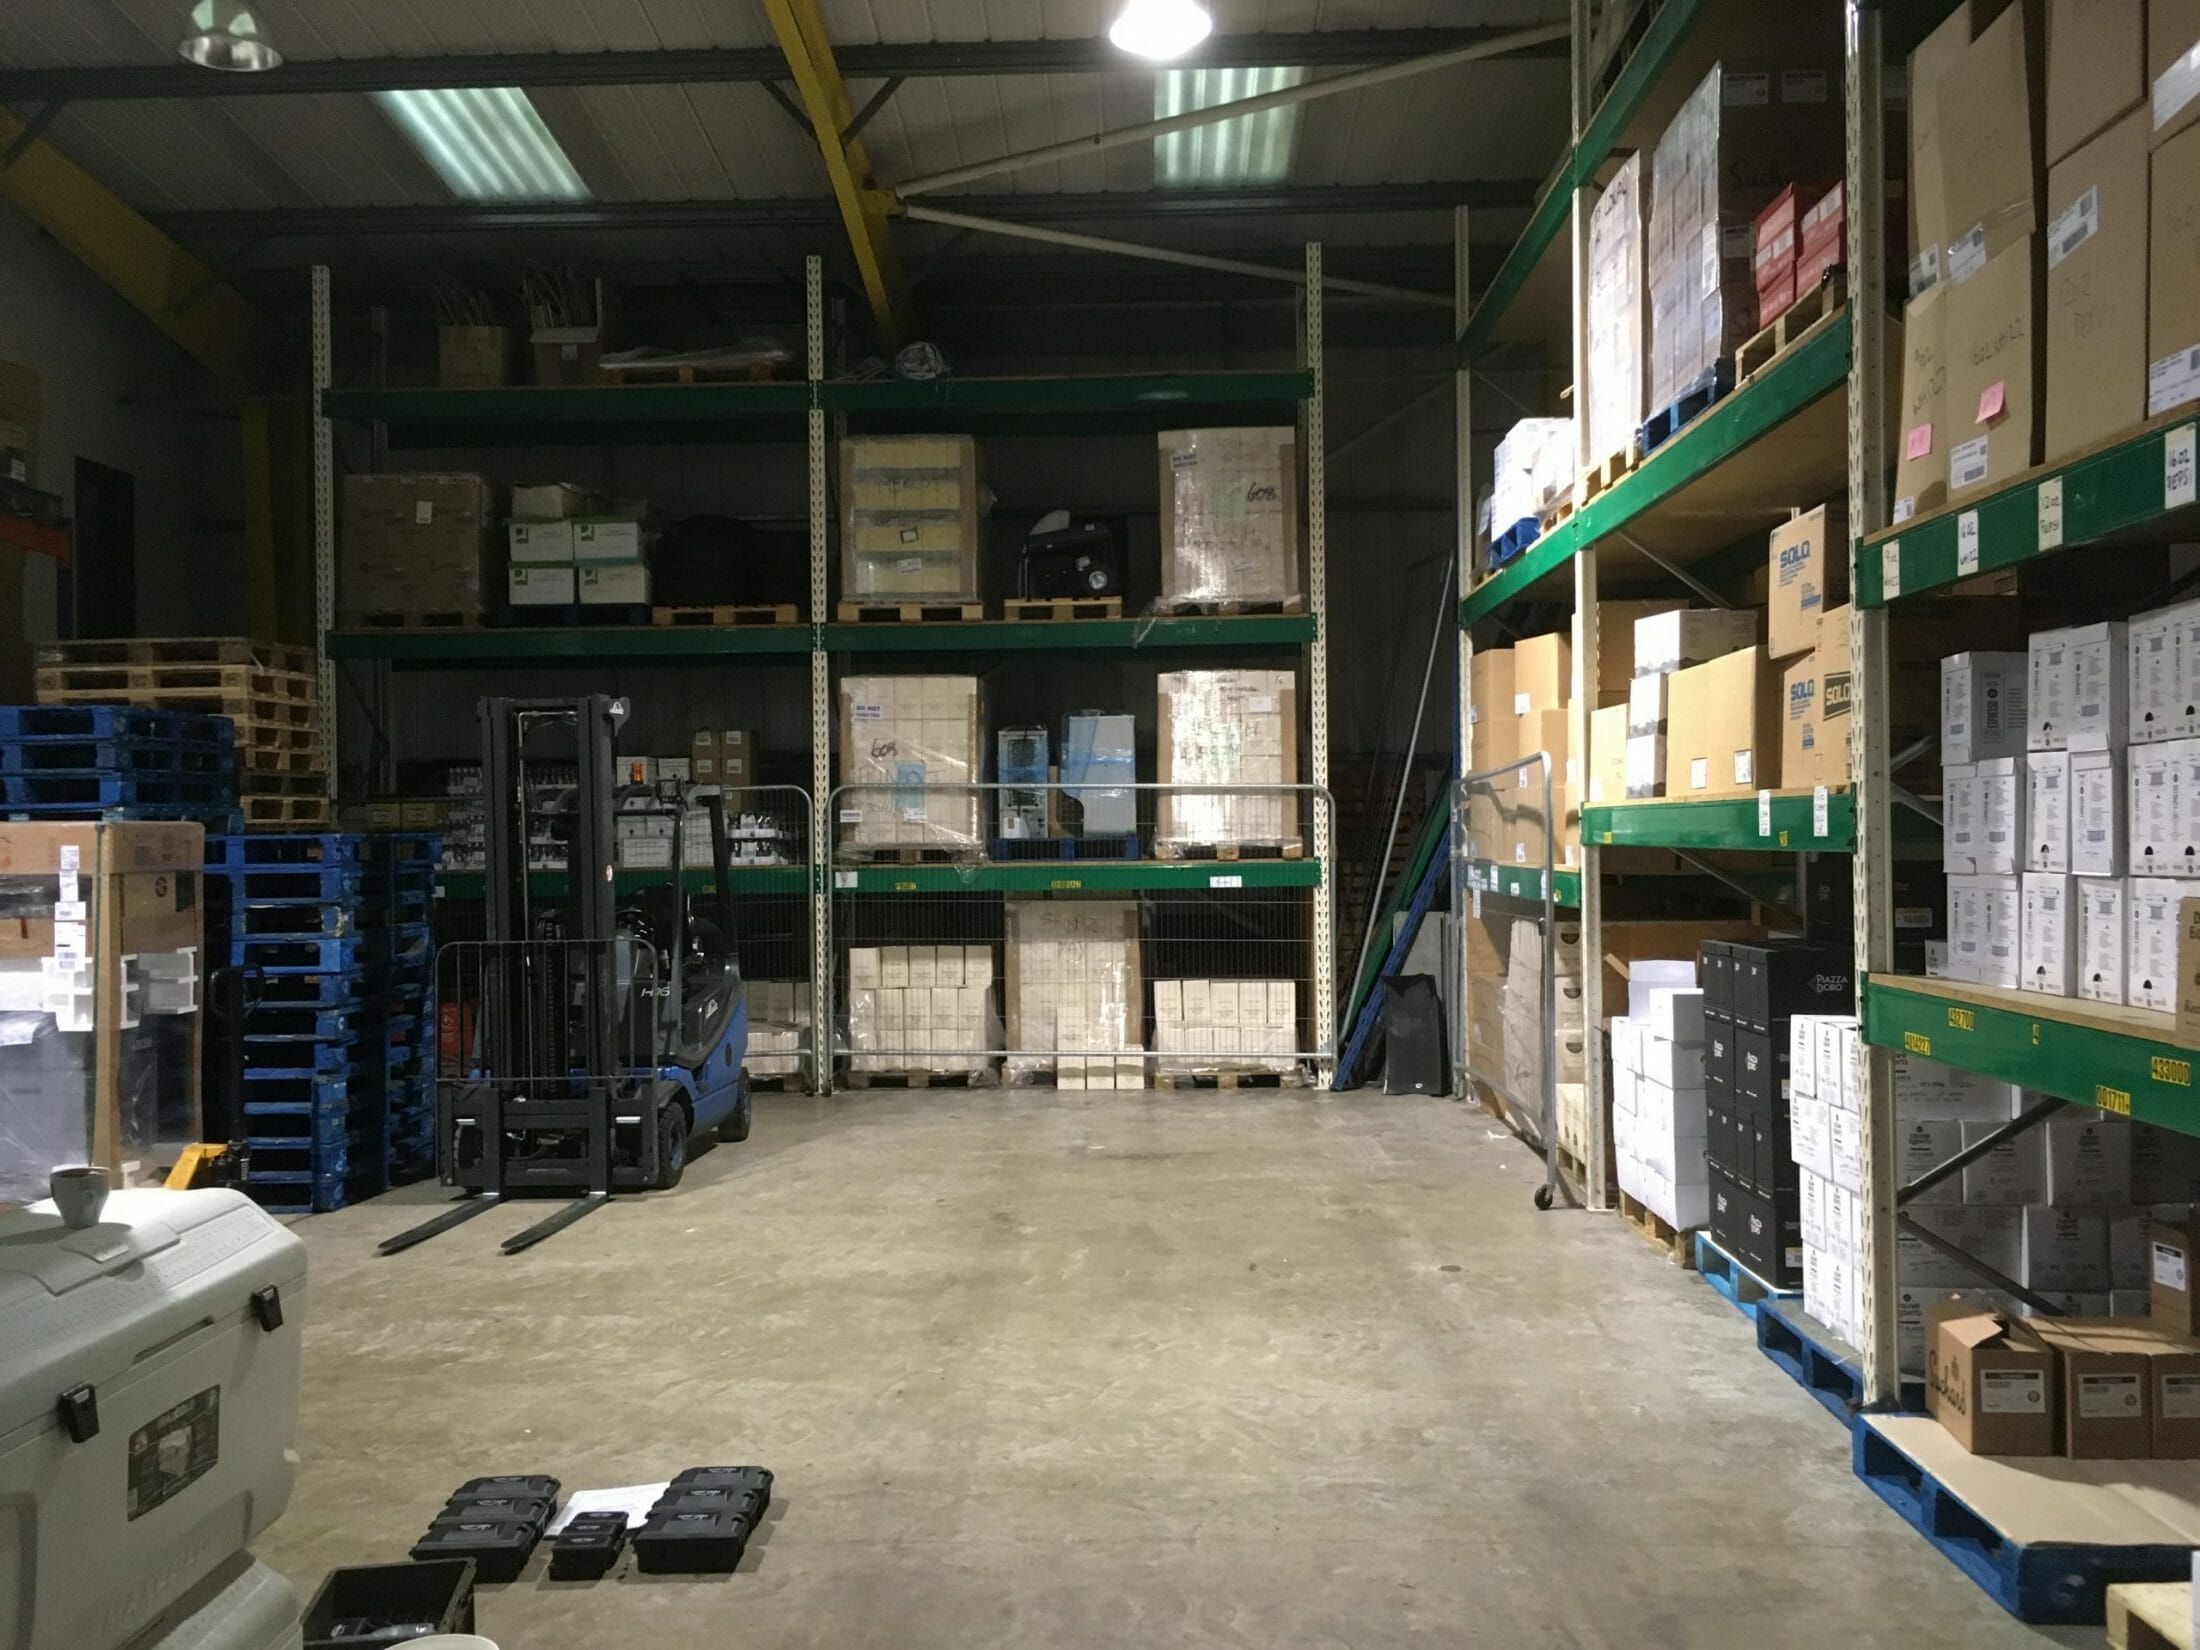 Commercial pest control in a commercial warehouse